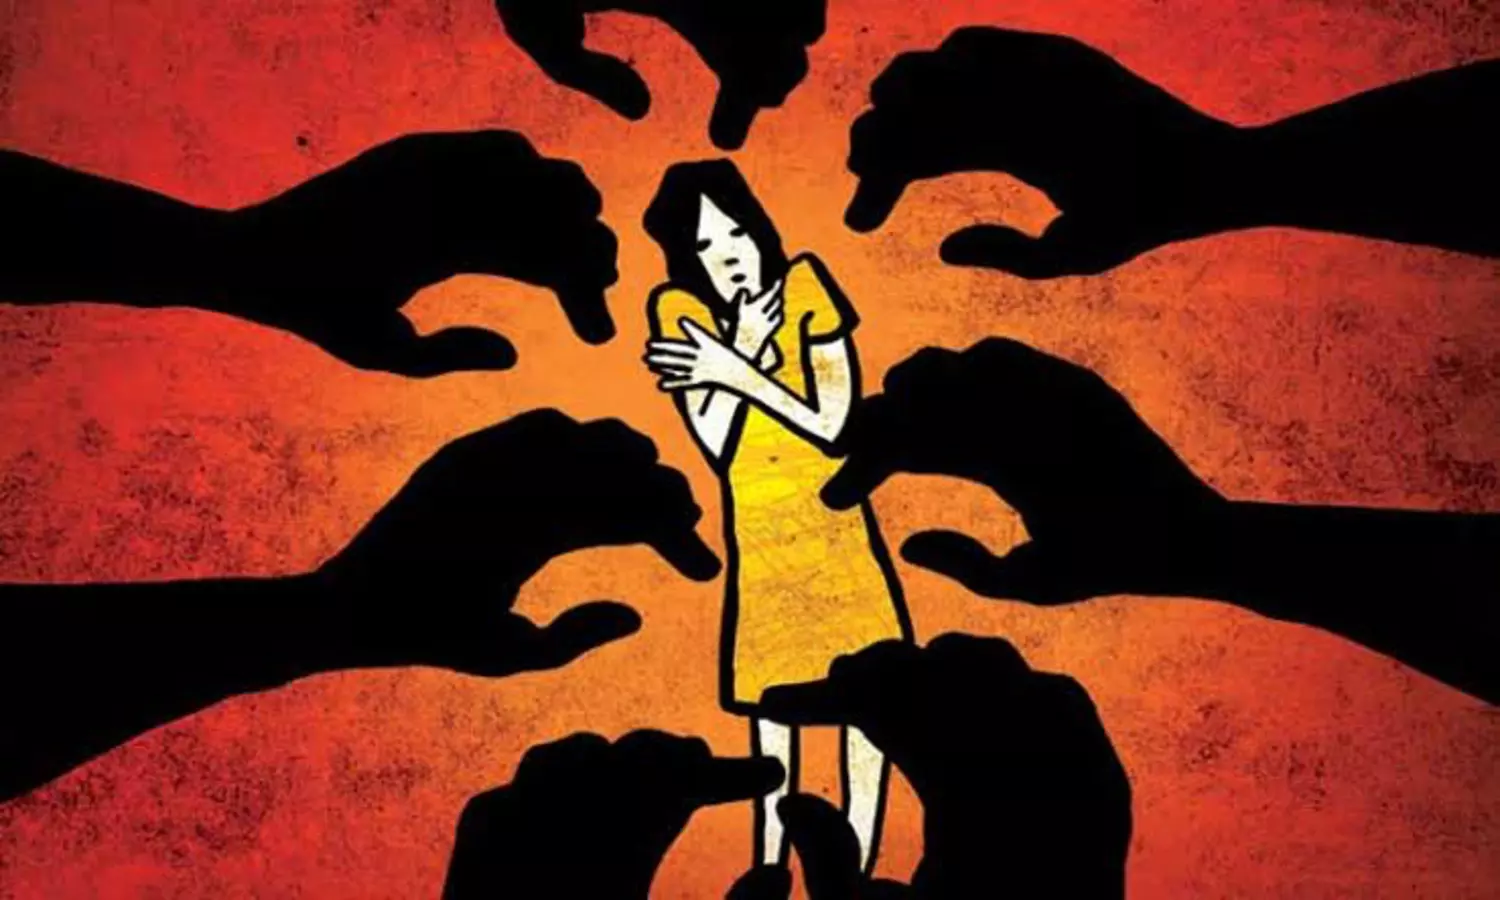 Young woman allegedly gangraped by 11 men in Visakhapatnam, police initiates probe